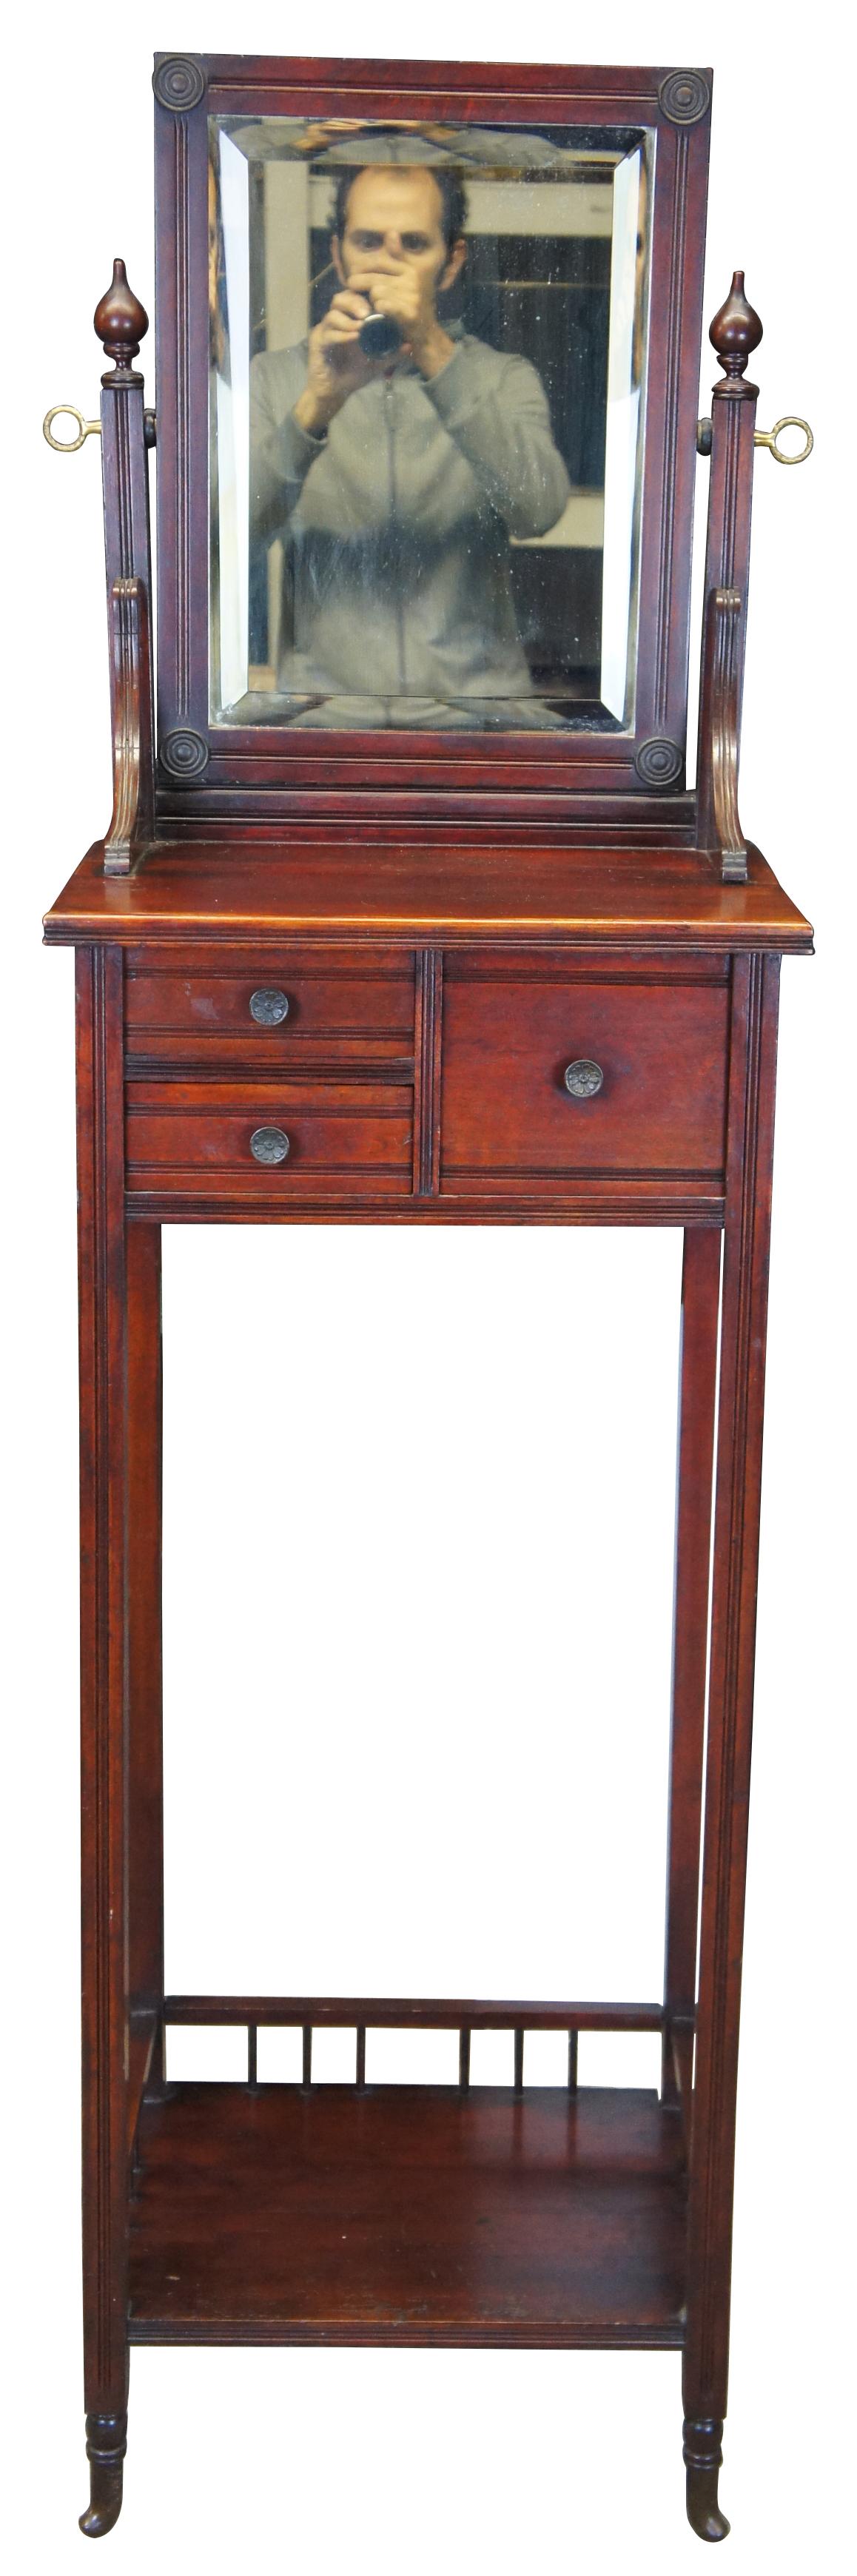 Victorian washstand or shaving stand, circa 1880s. Made from mahogany with three drawers, lower shelf and adjustable mirror. Lower shelf features a unique spindled gallery that is neatly placed above the flared meet.
  